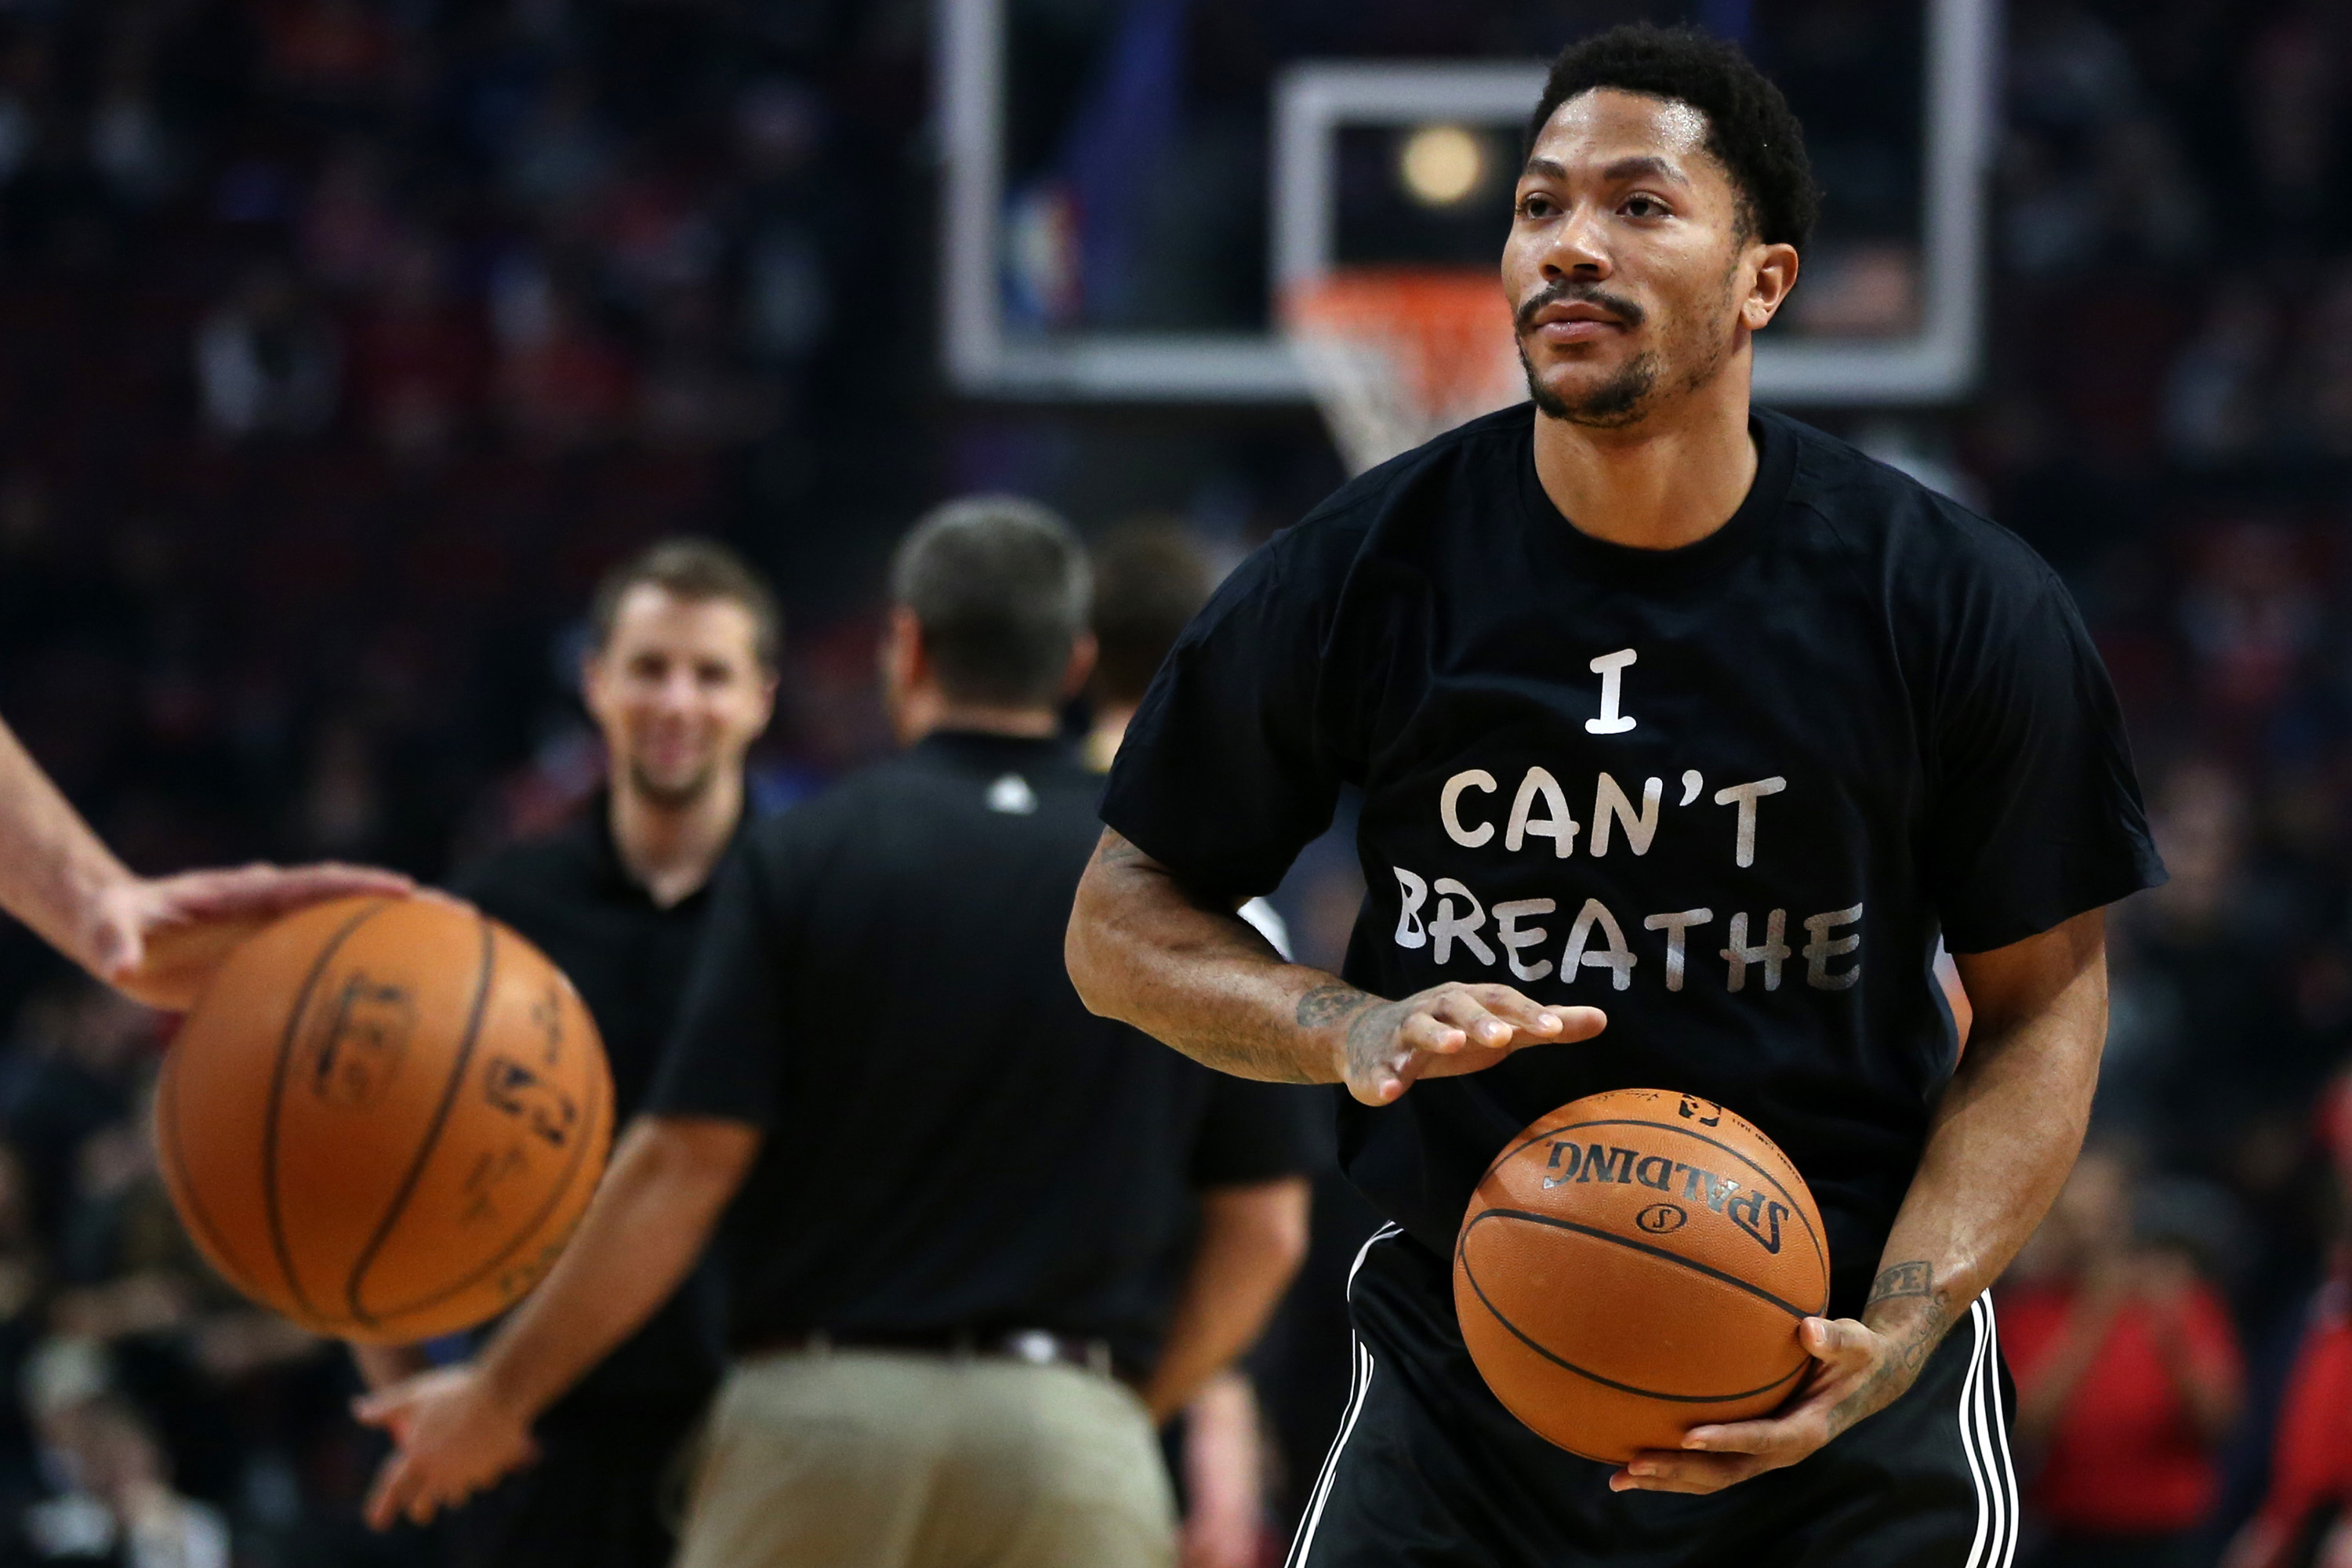 Chicago Bulls guard Derrick Rose stands on the court during the